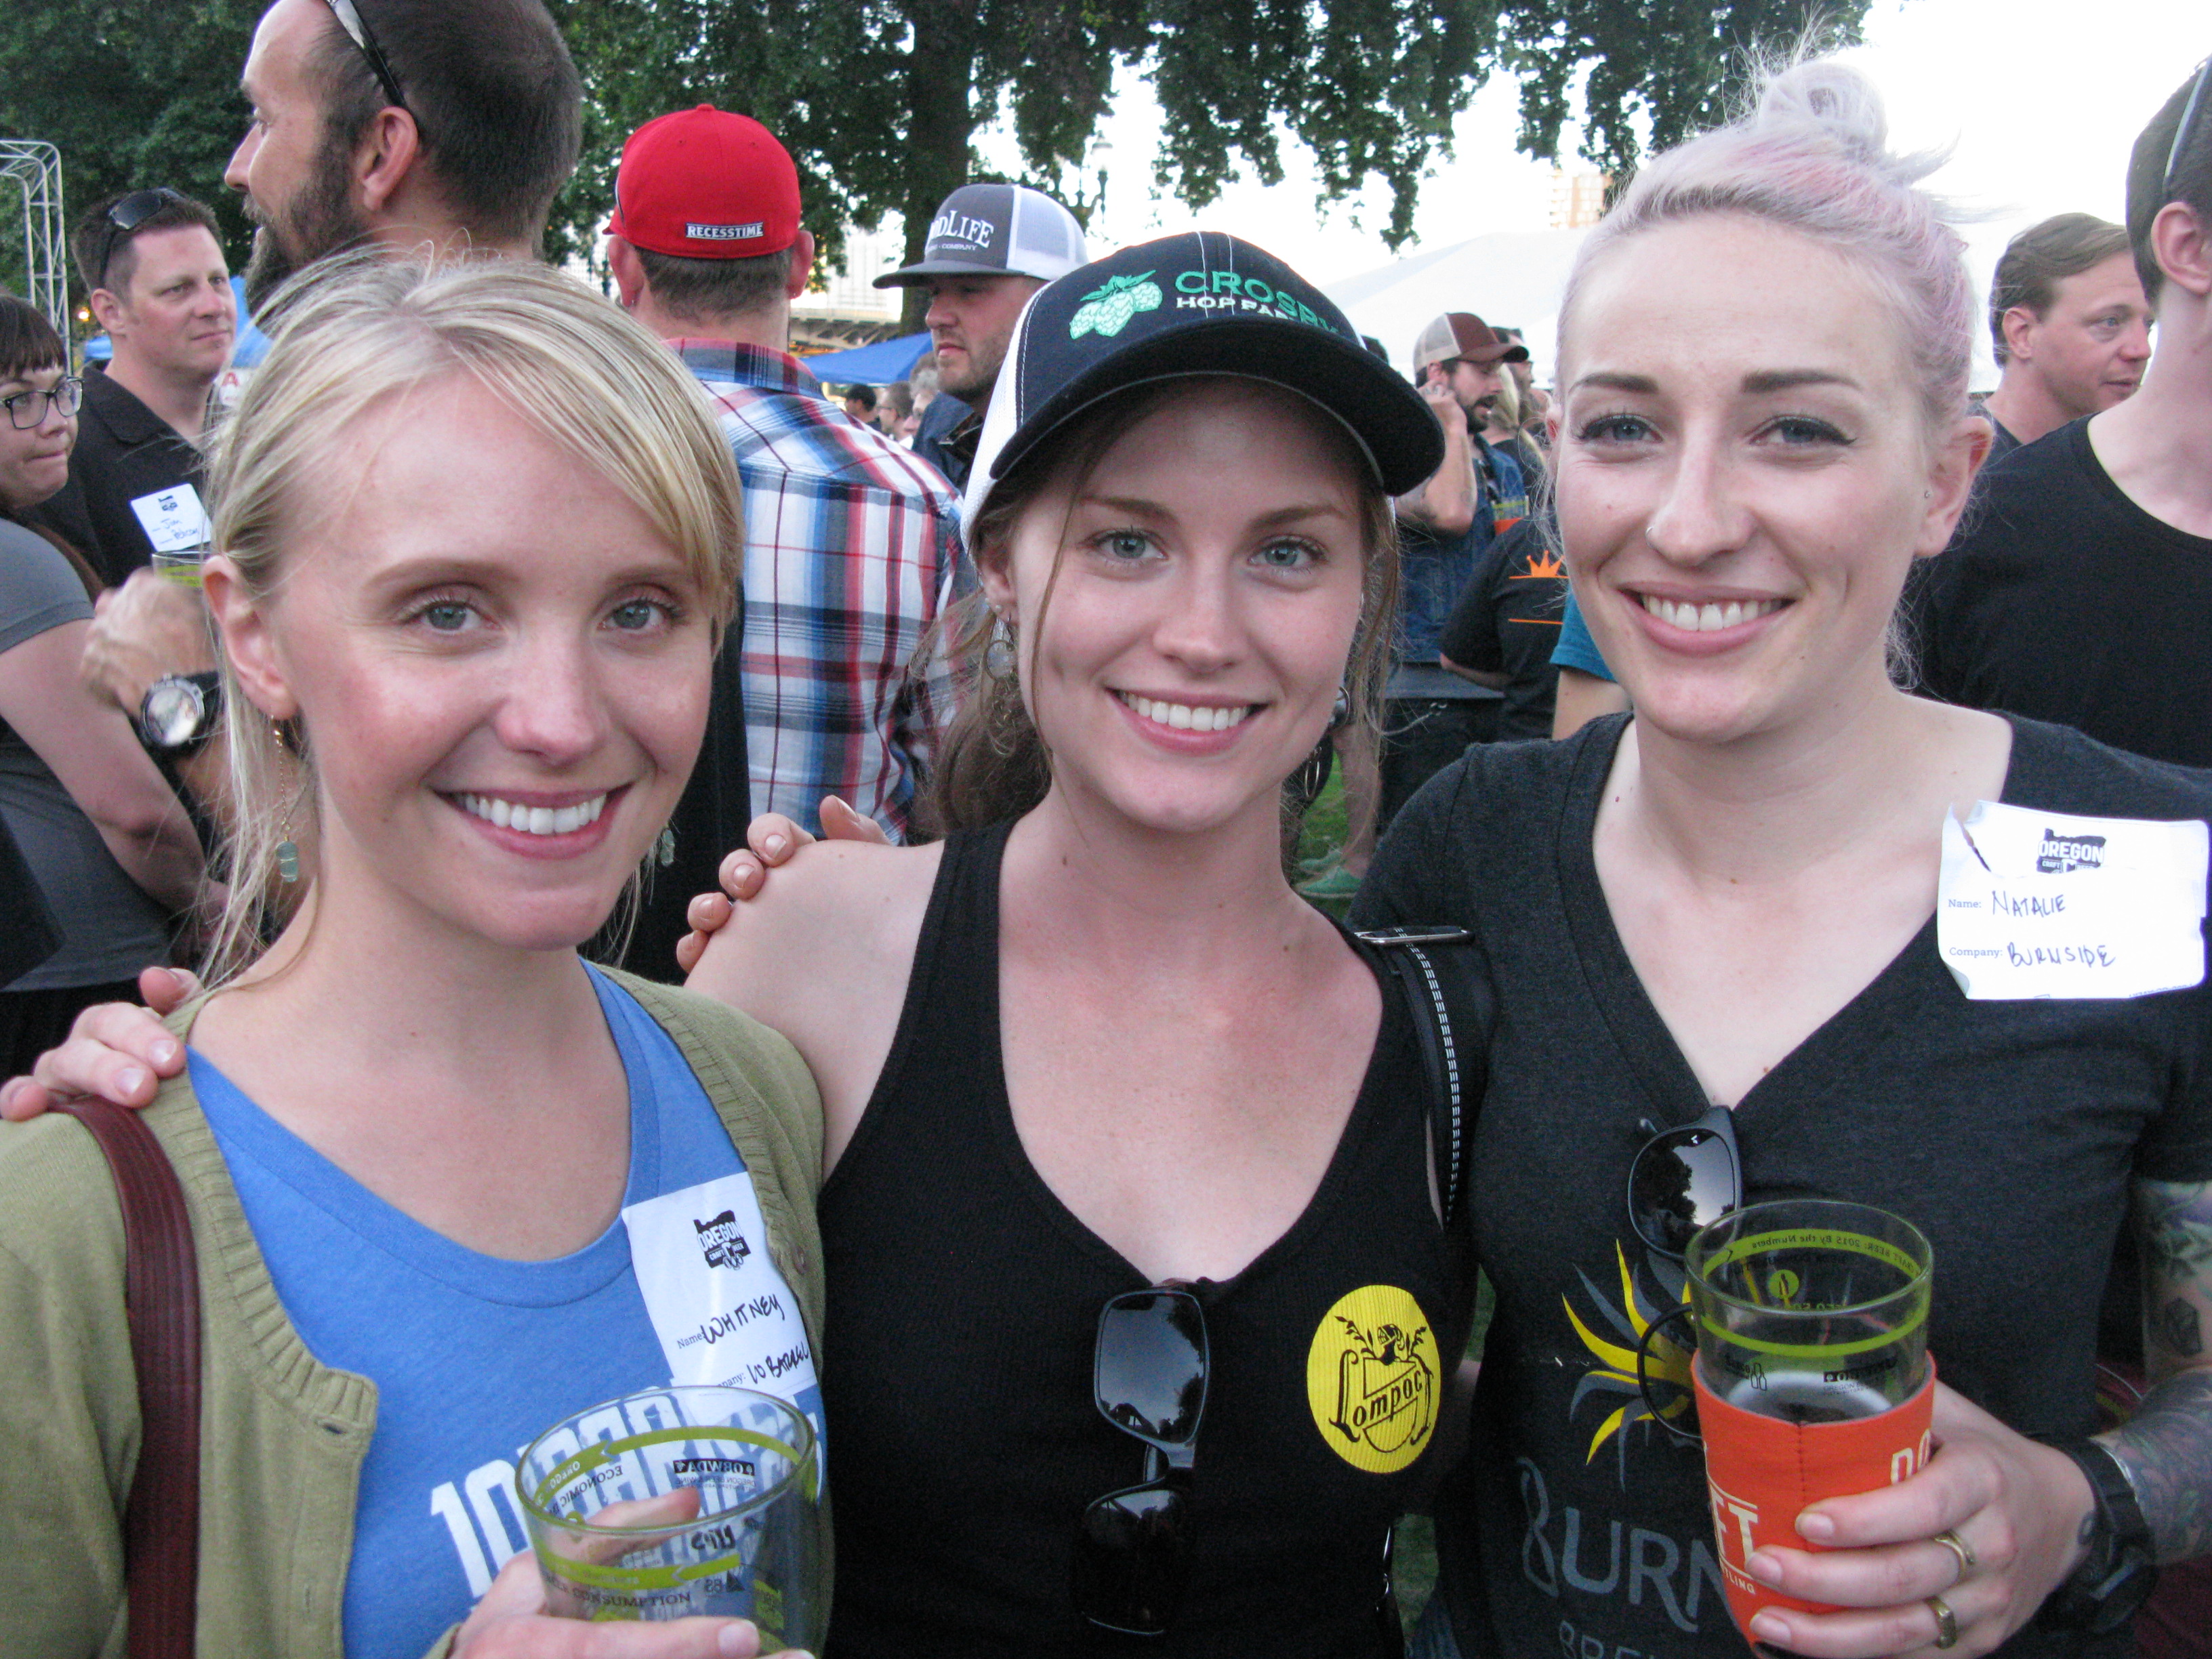 Whitney Burnside (10 Barrel) Cece French (formerly Lompoc, now in the hops industry) and Burnside's Natalie Baldwin at the Oregon Brewers Guild BBQ. (FoystonFoto)